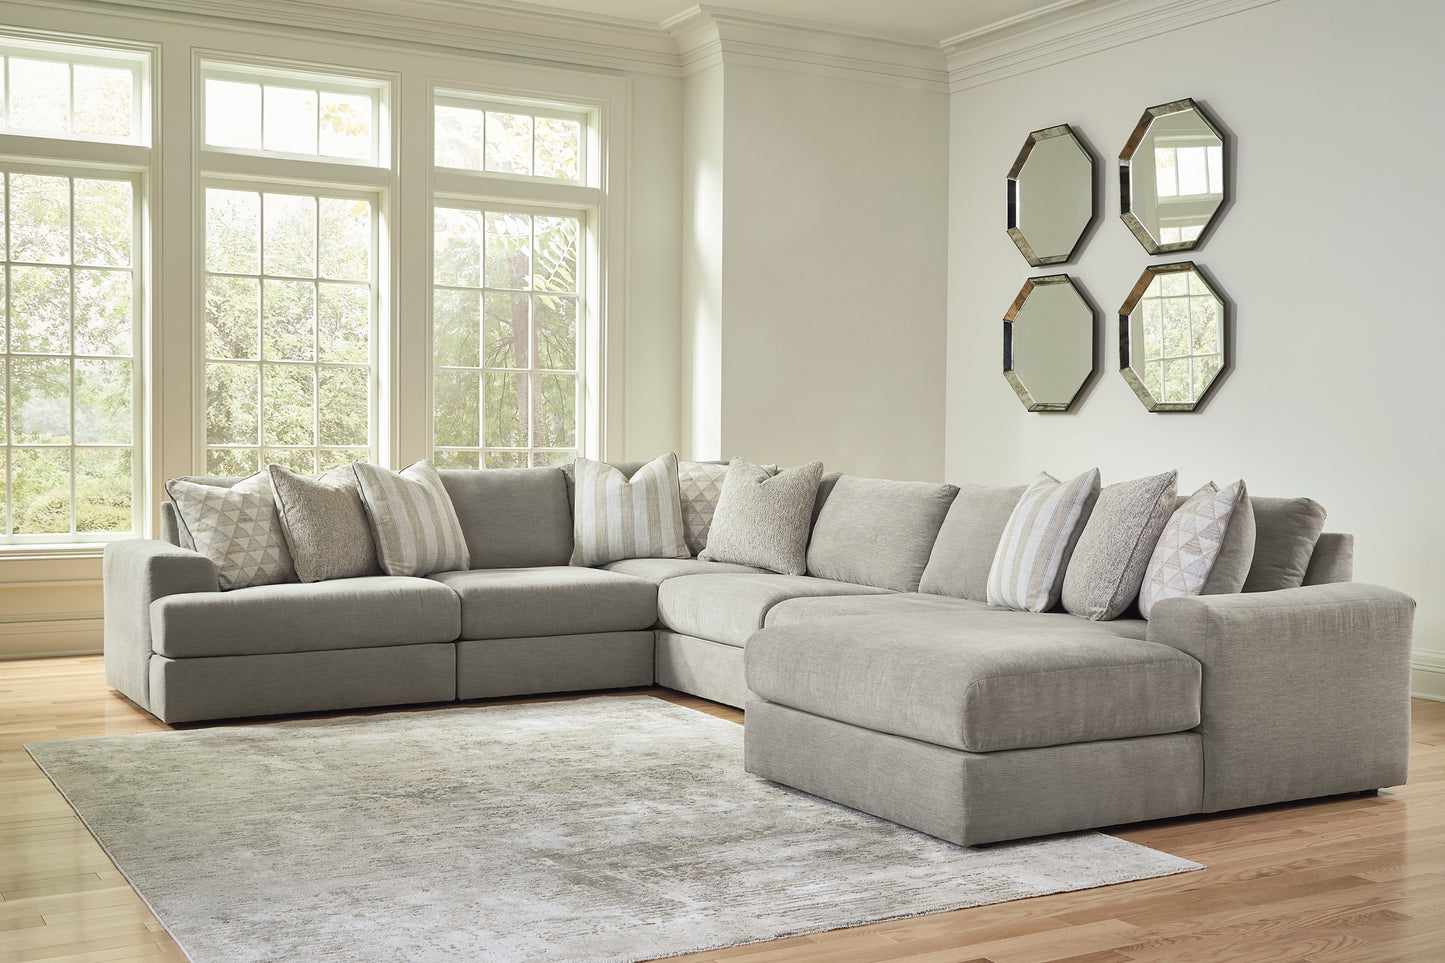 Avaliyah 6-Piece Sectional with Ottoman